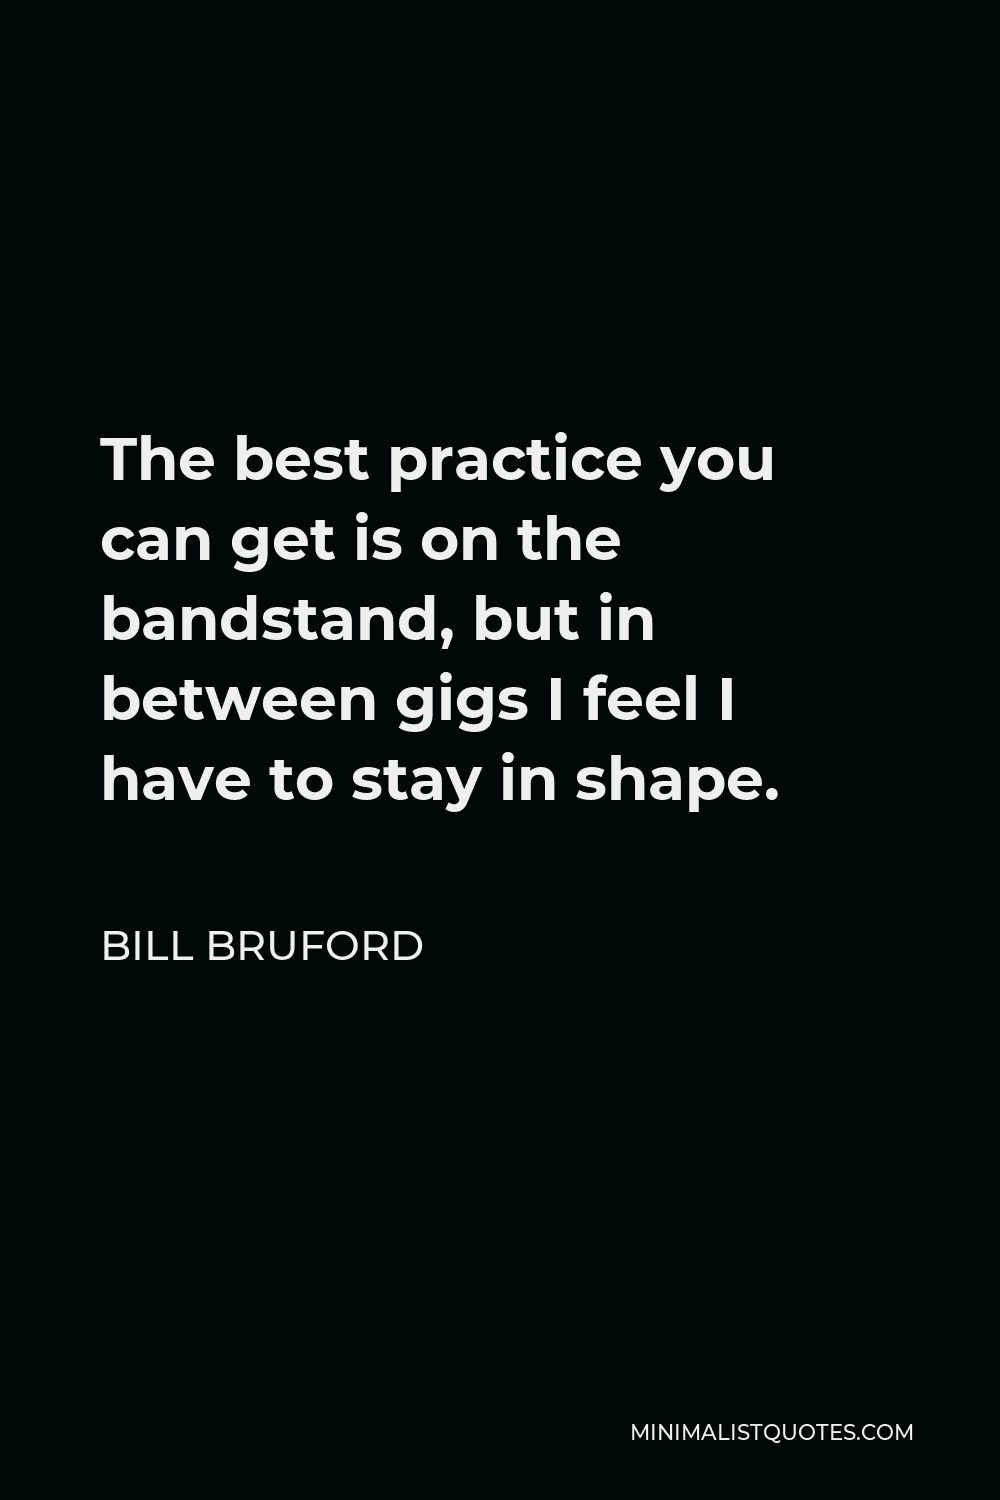 Bill Bruford Quote - The best practice you can get is on the bandstand, but in between gigs I feel I have to stay in shape.